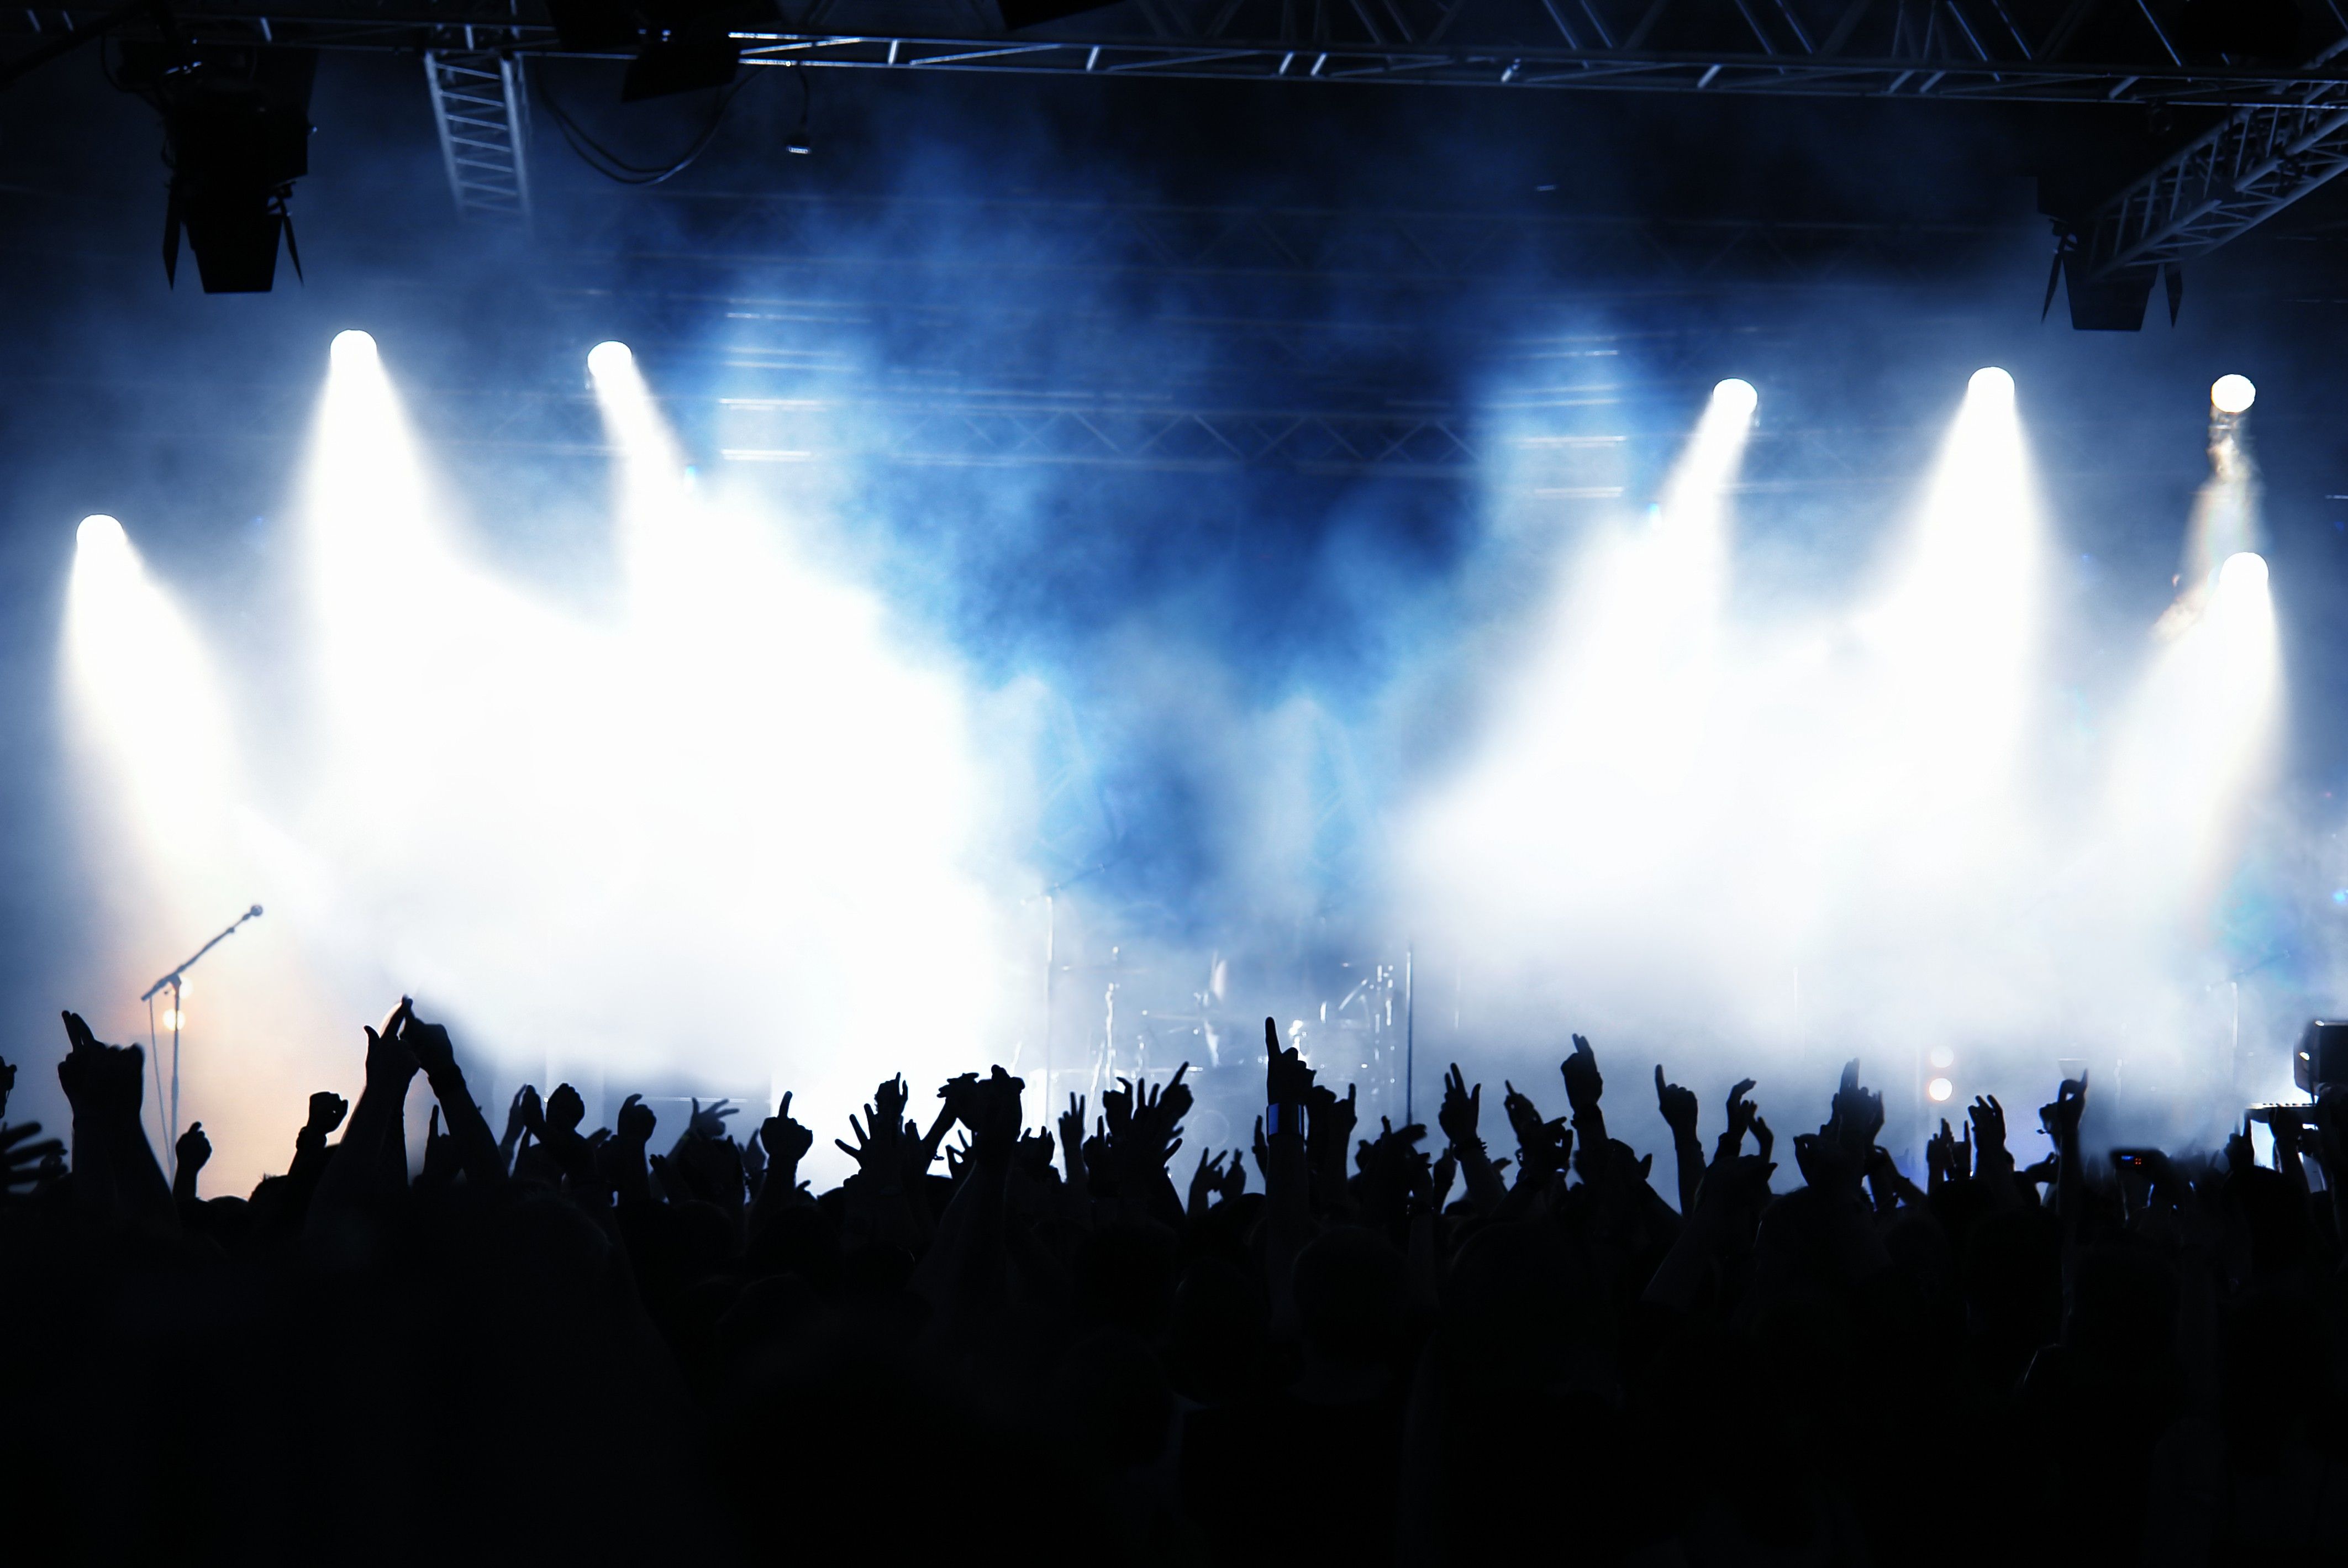 Wallpaper, sunlight, music, concerts, light, performance, stage, darkness, crowd, atmosphere of earth, rock concert 4250x2838